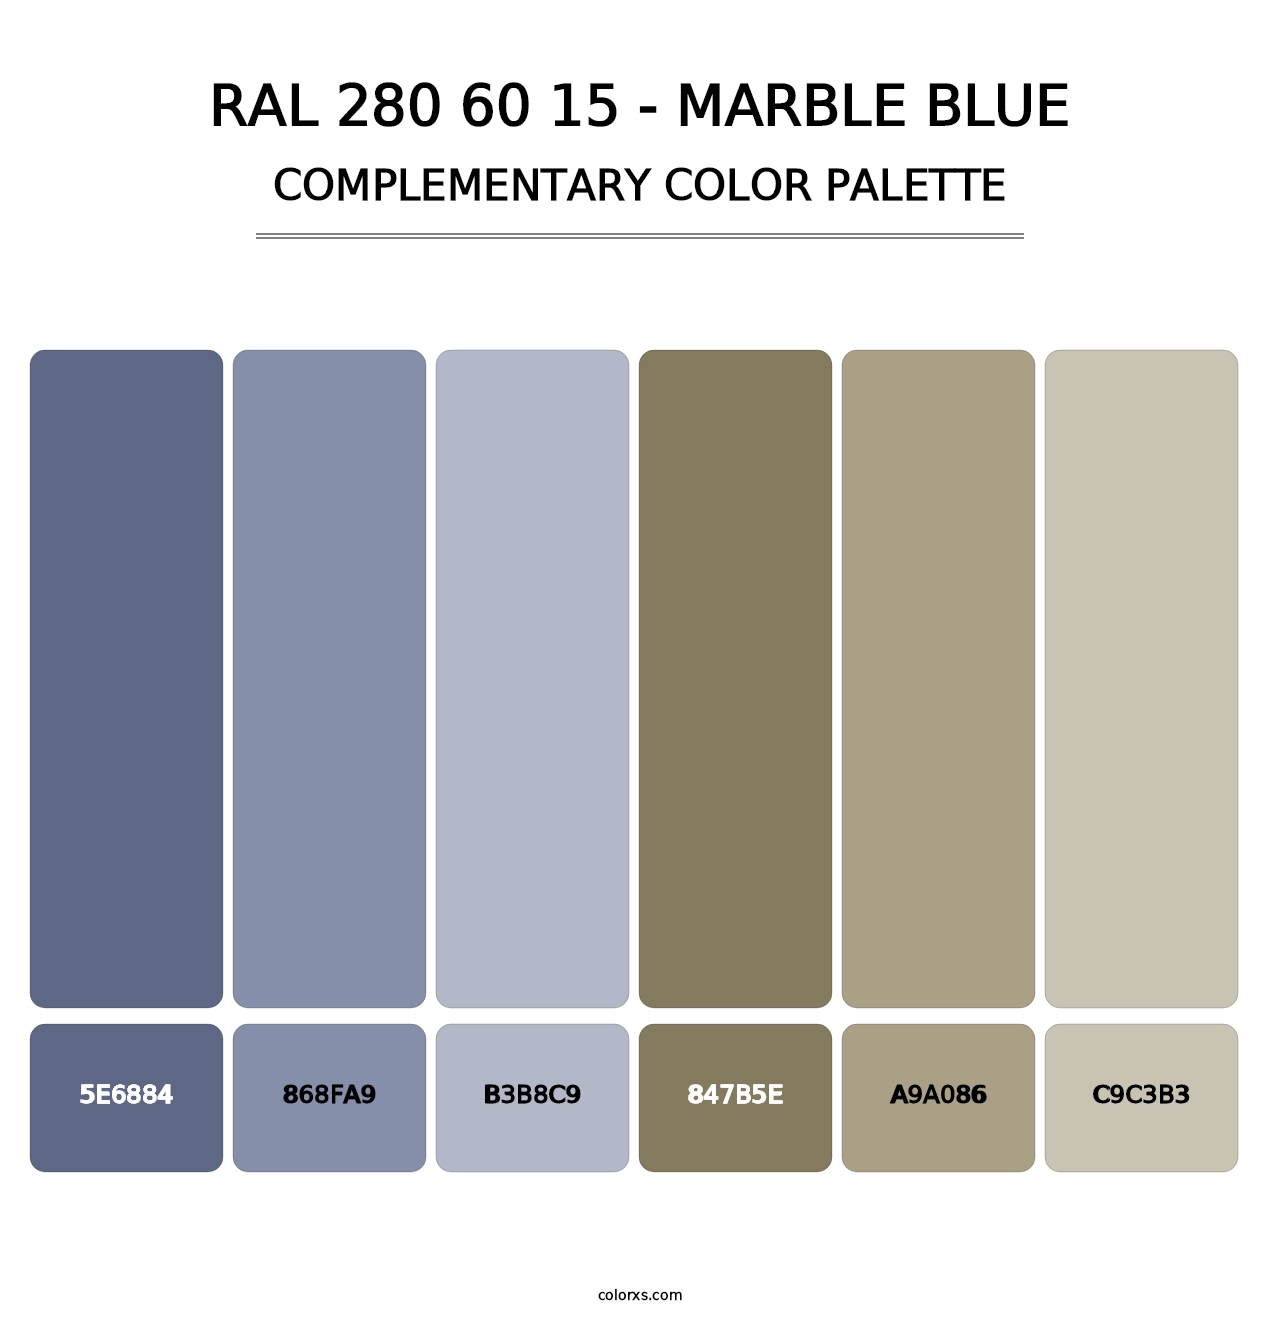 RAL 280 60 15 - Marble Blue - Complementary Color Palette